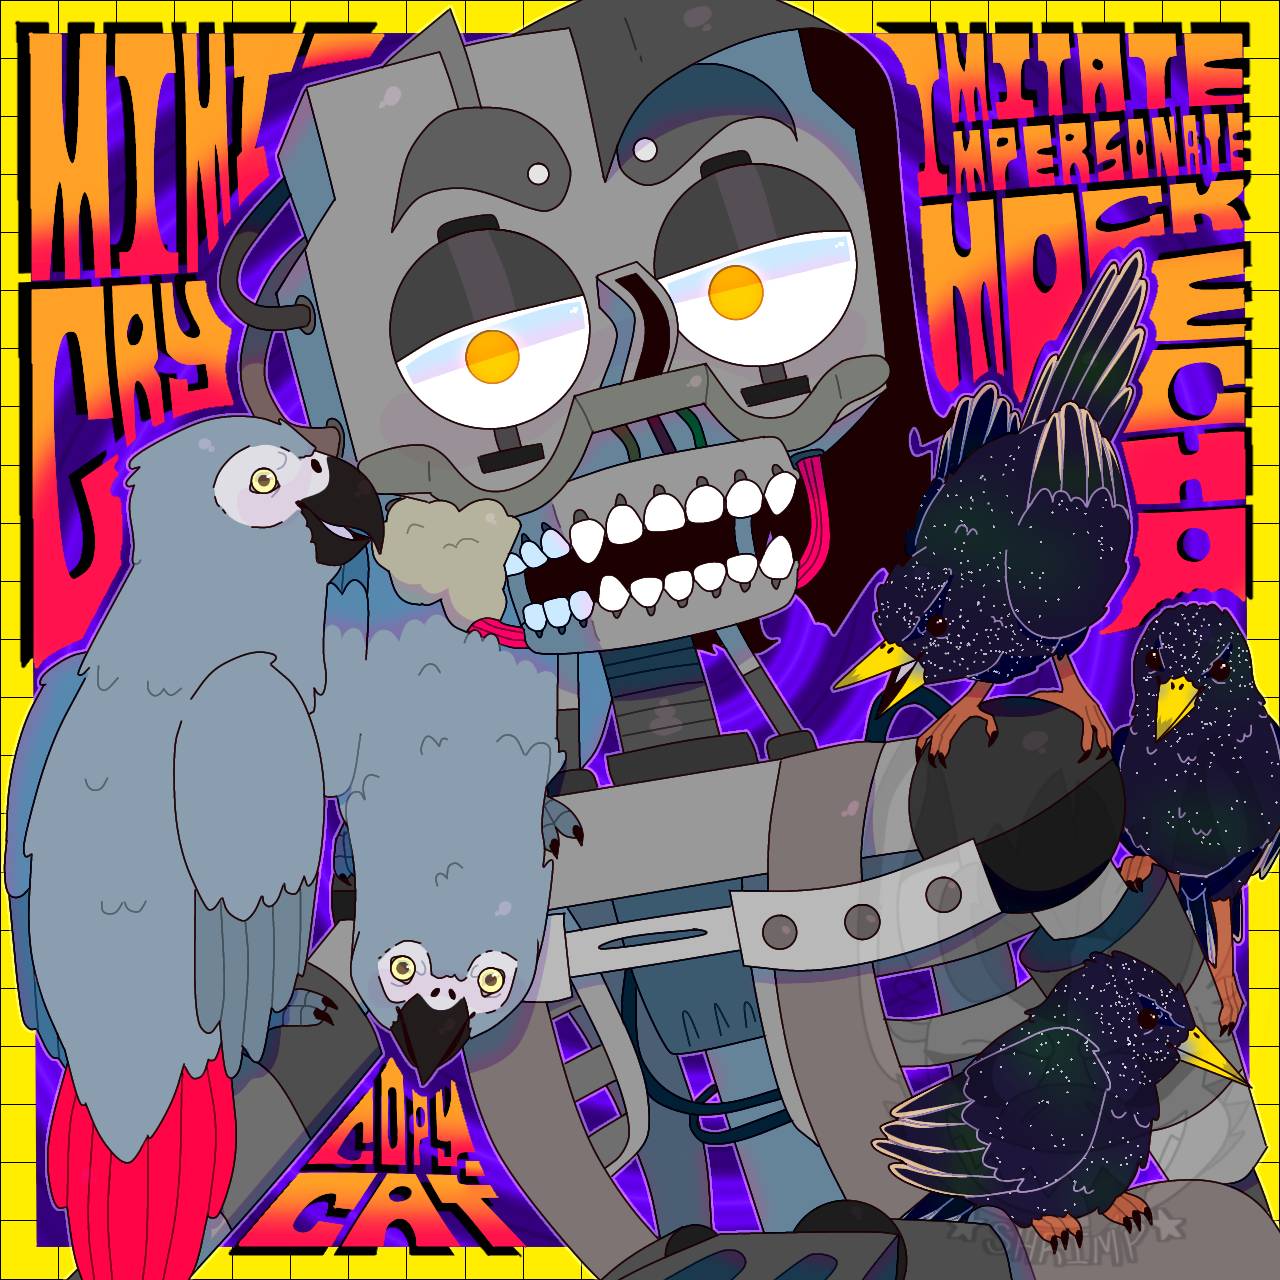 Mimicry (The Mimic)(FNAF SB: RUIN) by Squint-The-Dutchie on DeviantArt